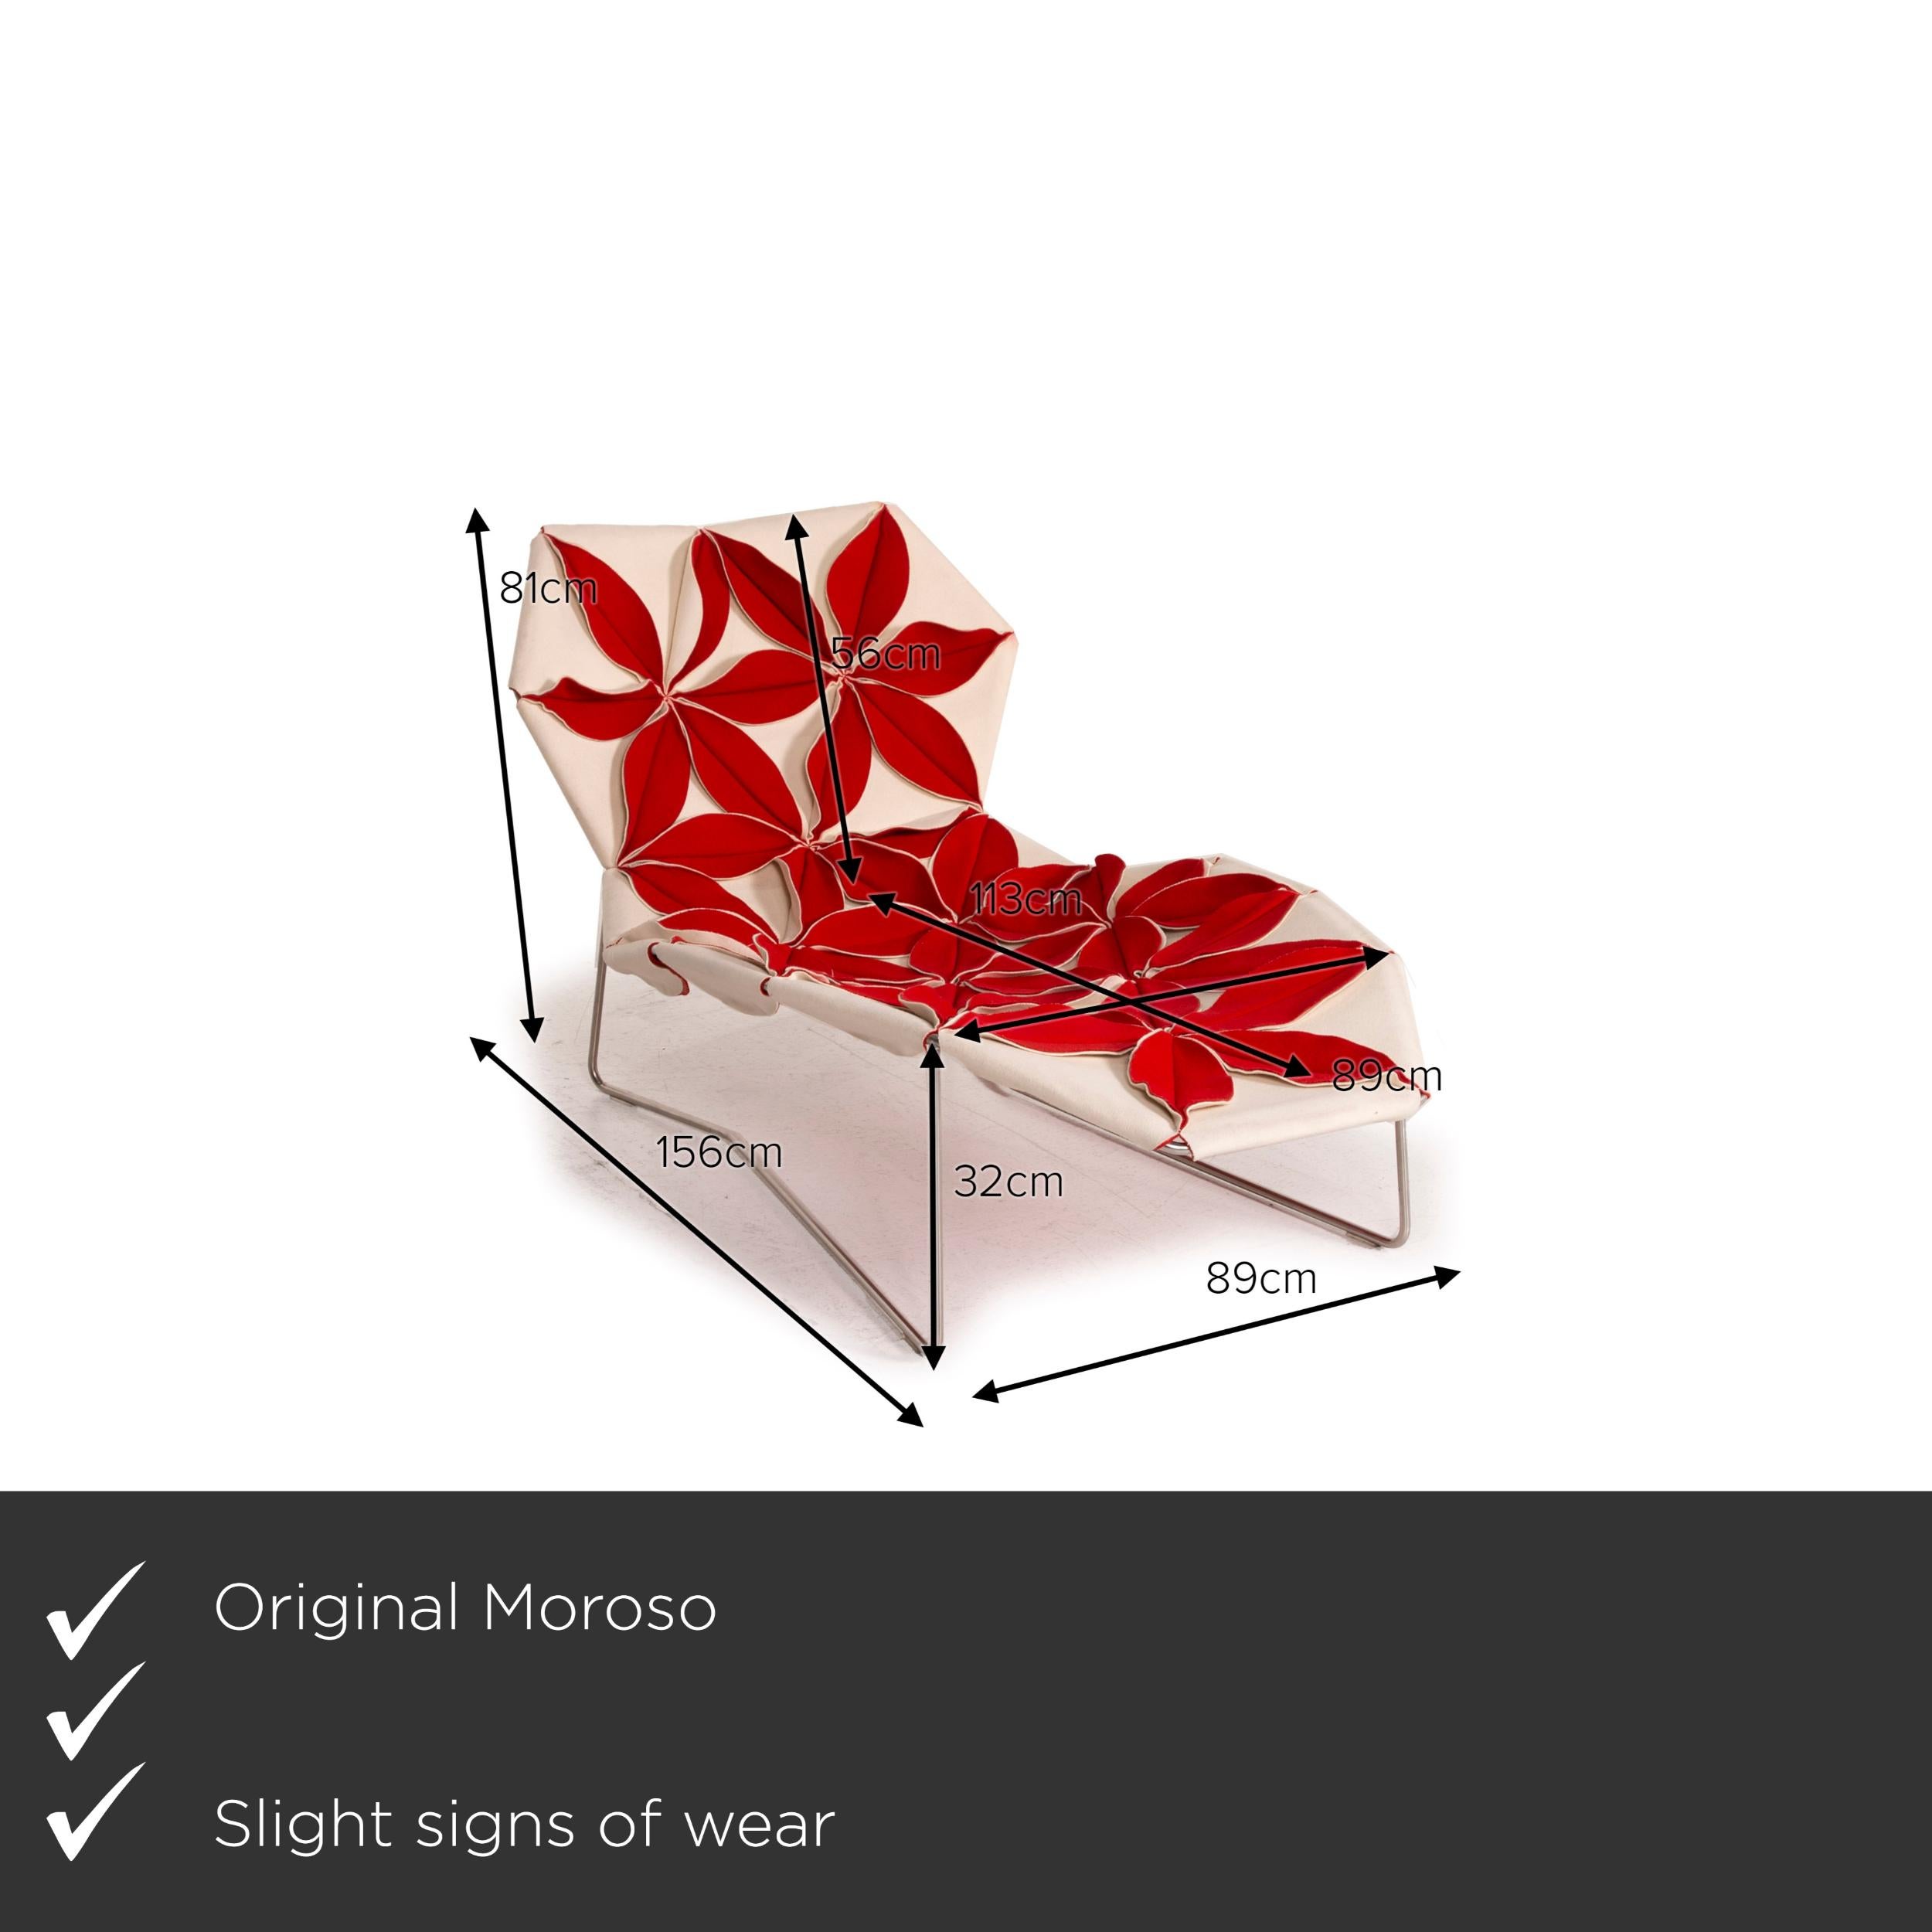 We present to you a Moroso Antibodi Fabric lounger red white pattern.
 

 Product measurements in centimeters:
 

Depth: 156
Width: 89
Height: 81
Seat height: 32
Seat depth: 113
Seat width: 89
Back height: 56.

 